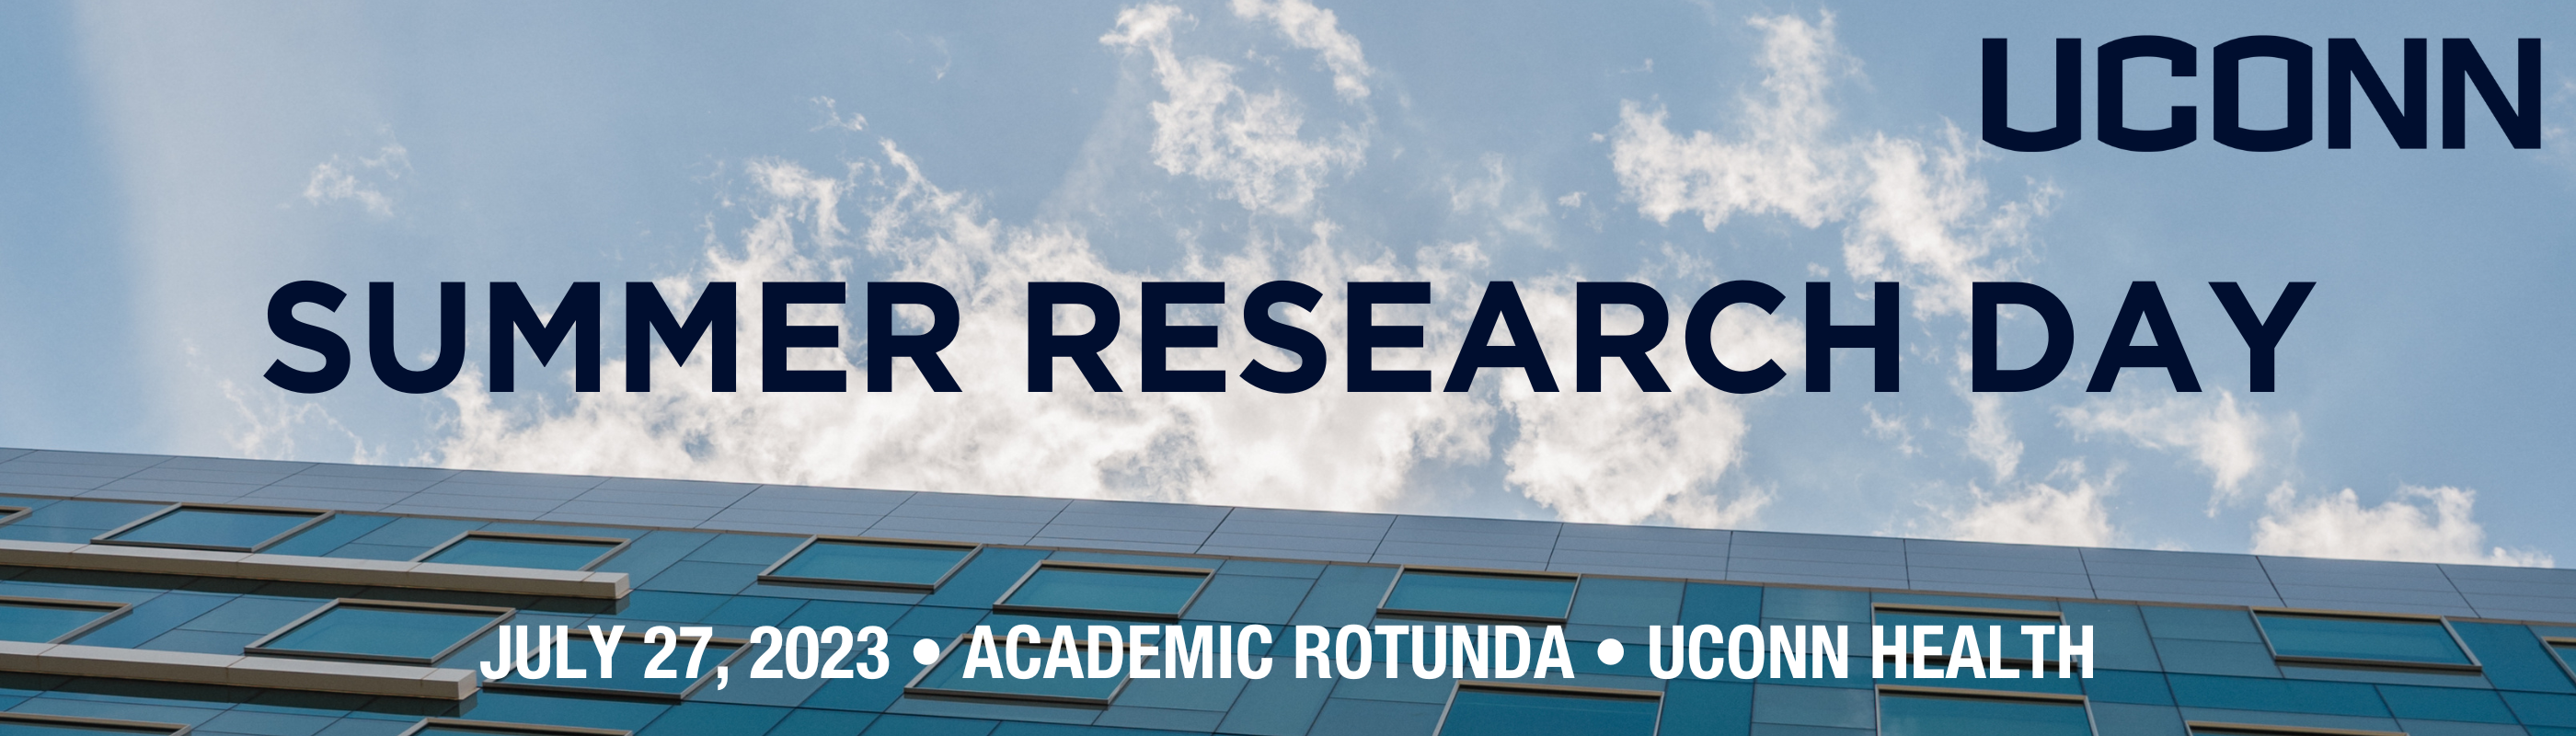 A blue sky with patchy clouds can be seen above the UConn Health facade. Over the image, text reads, "Summer Research Day. July 27, 2023 - Academic Rotunda - UConn Health."